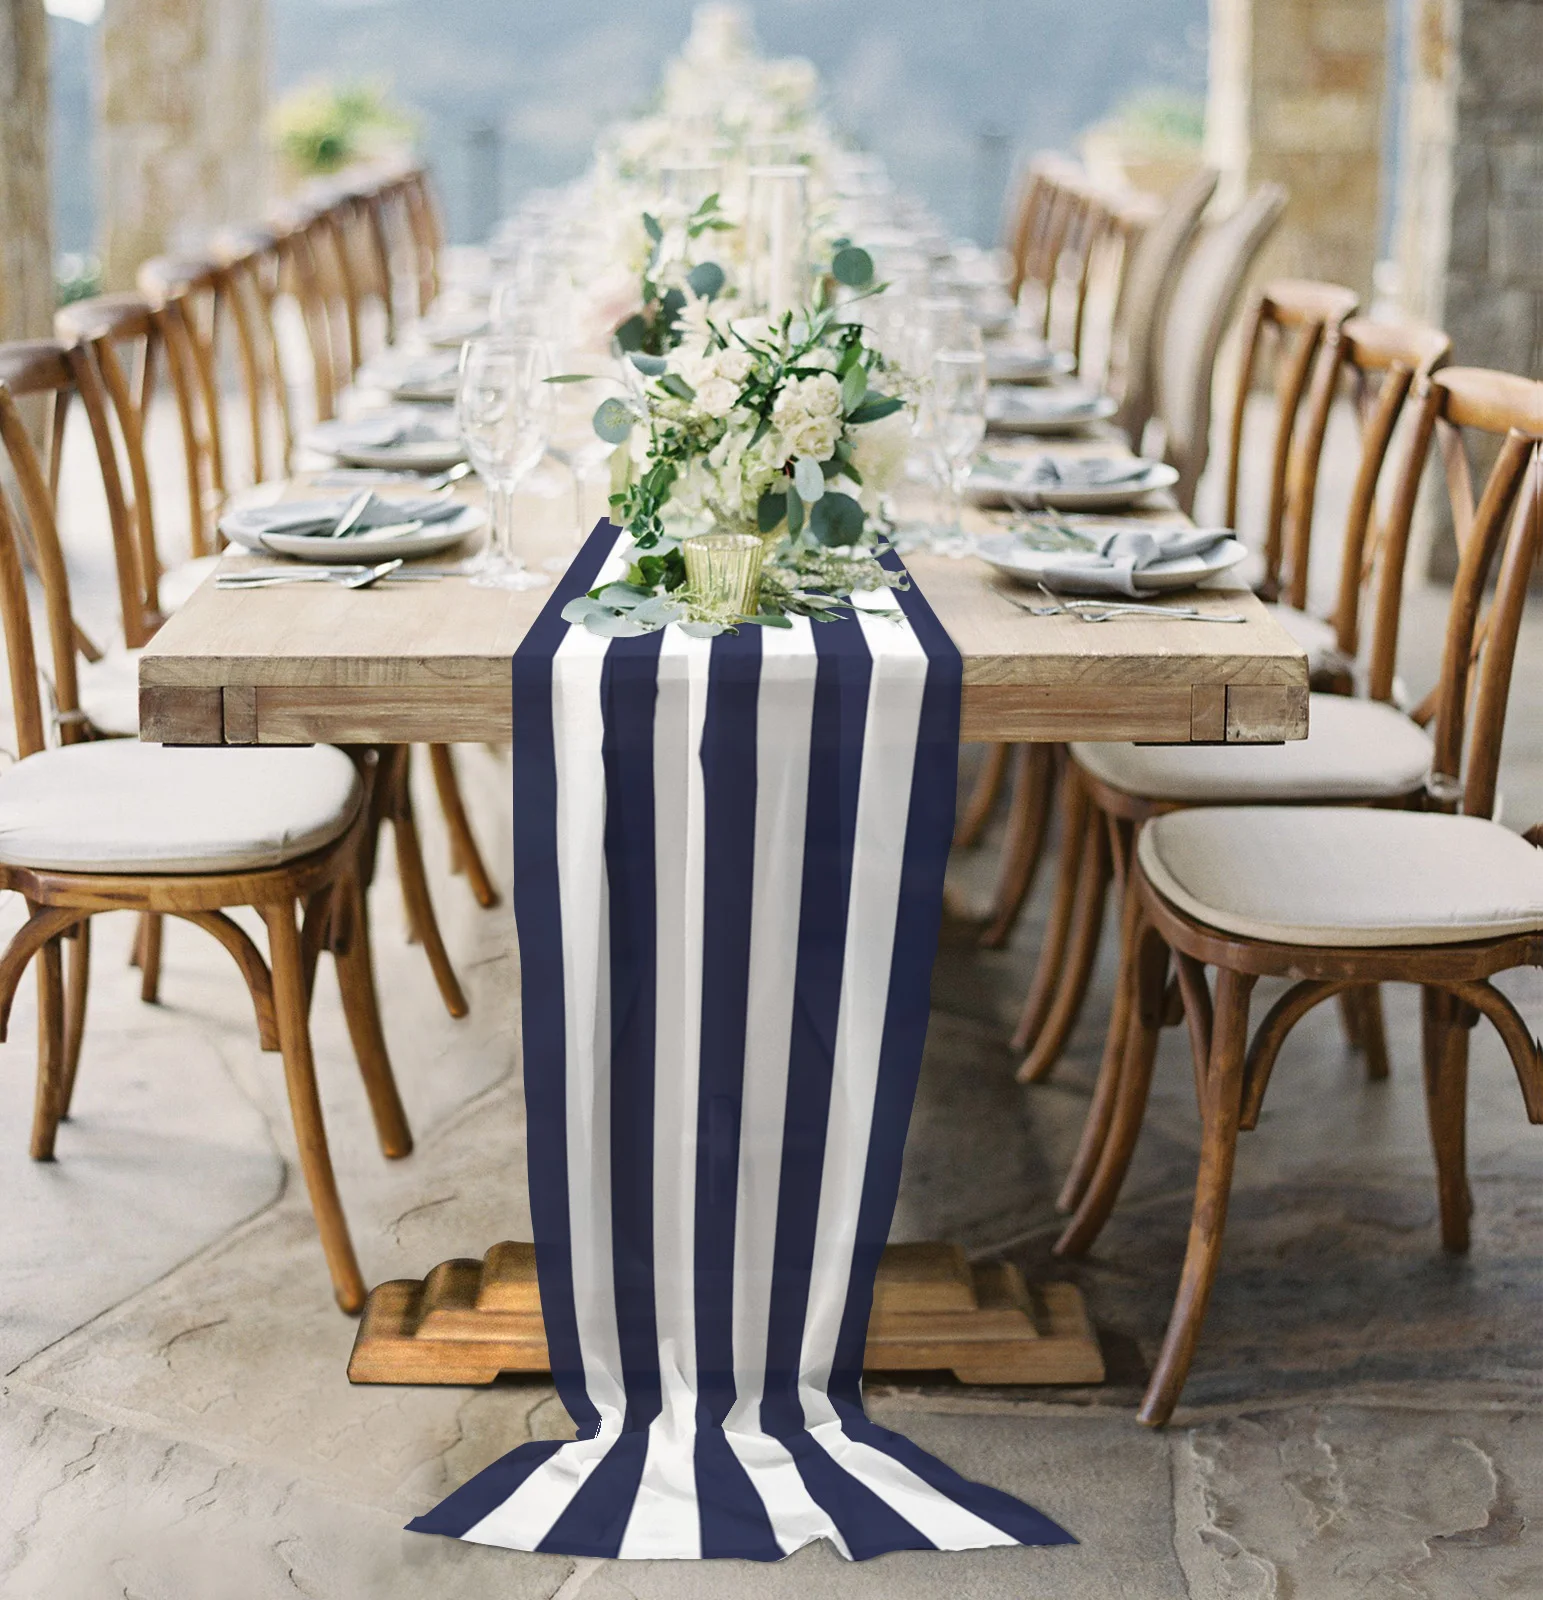 Navy Blue White Stripes Sheer Chiffon Table Runner Wedding Party Table Decoration Tablecloth Kitchen Table Runner